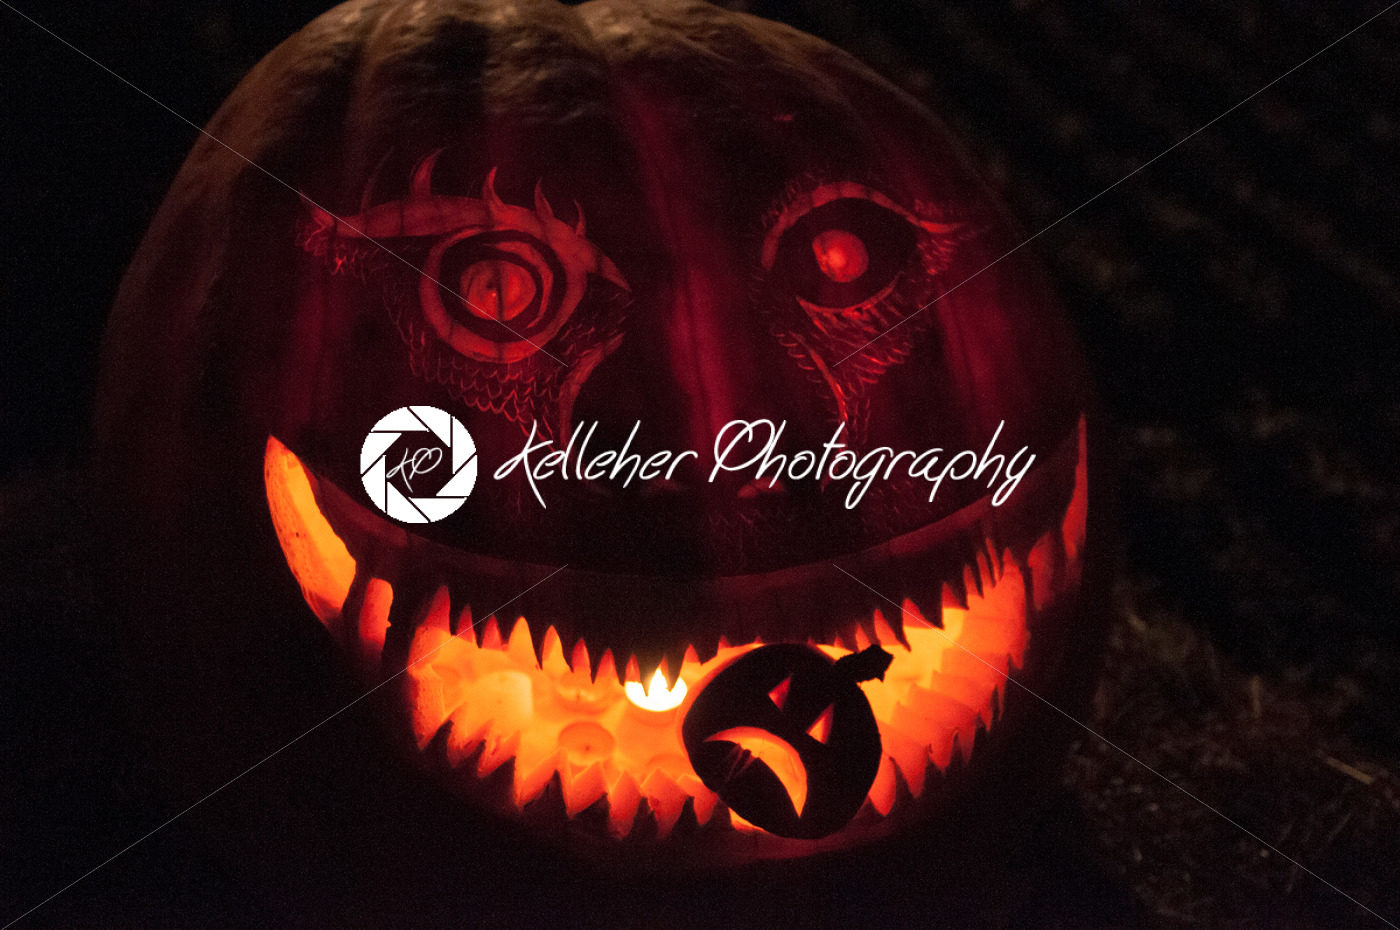 CHADDS FORD, PA – OCTOBER 26: The Great Pumpkin Carve carving contest on October 26, 2013 - Kelleher Photography Store